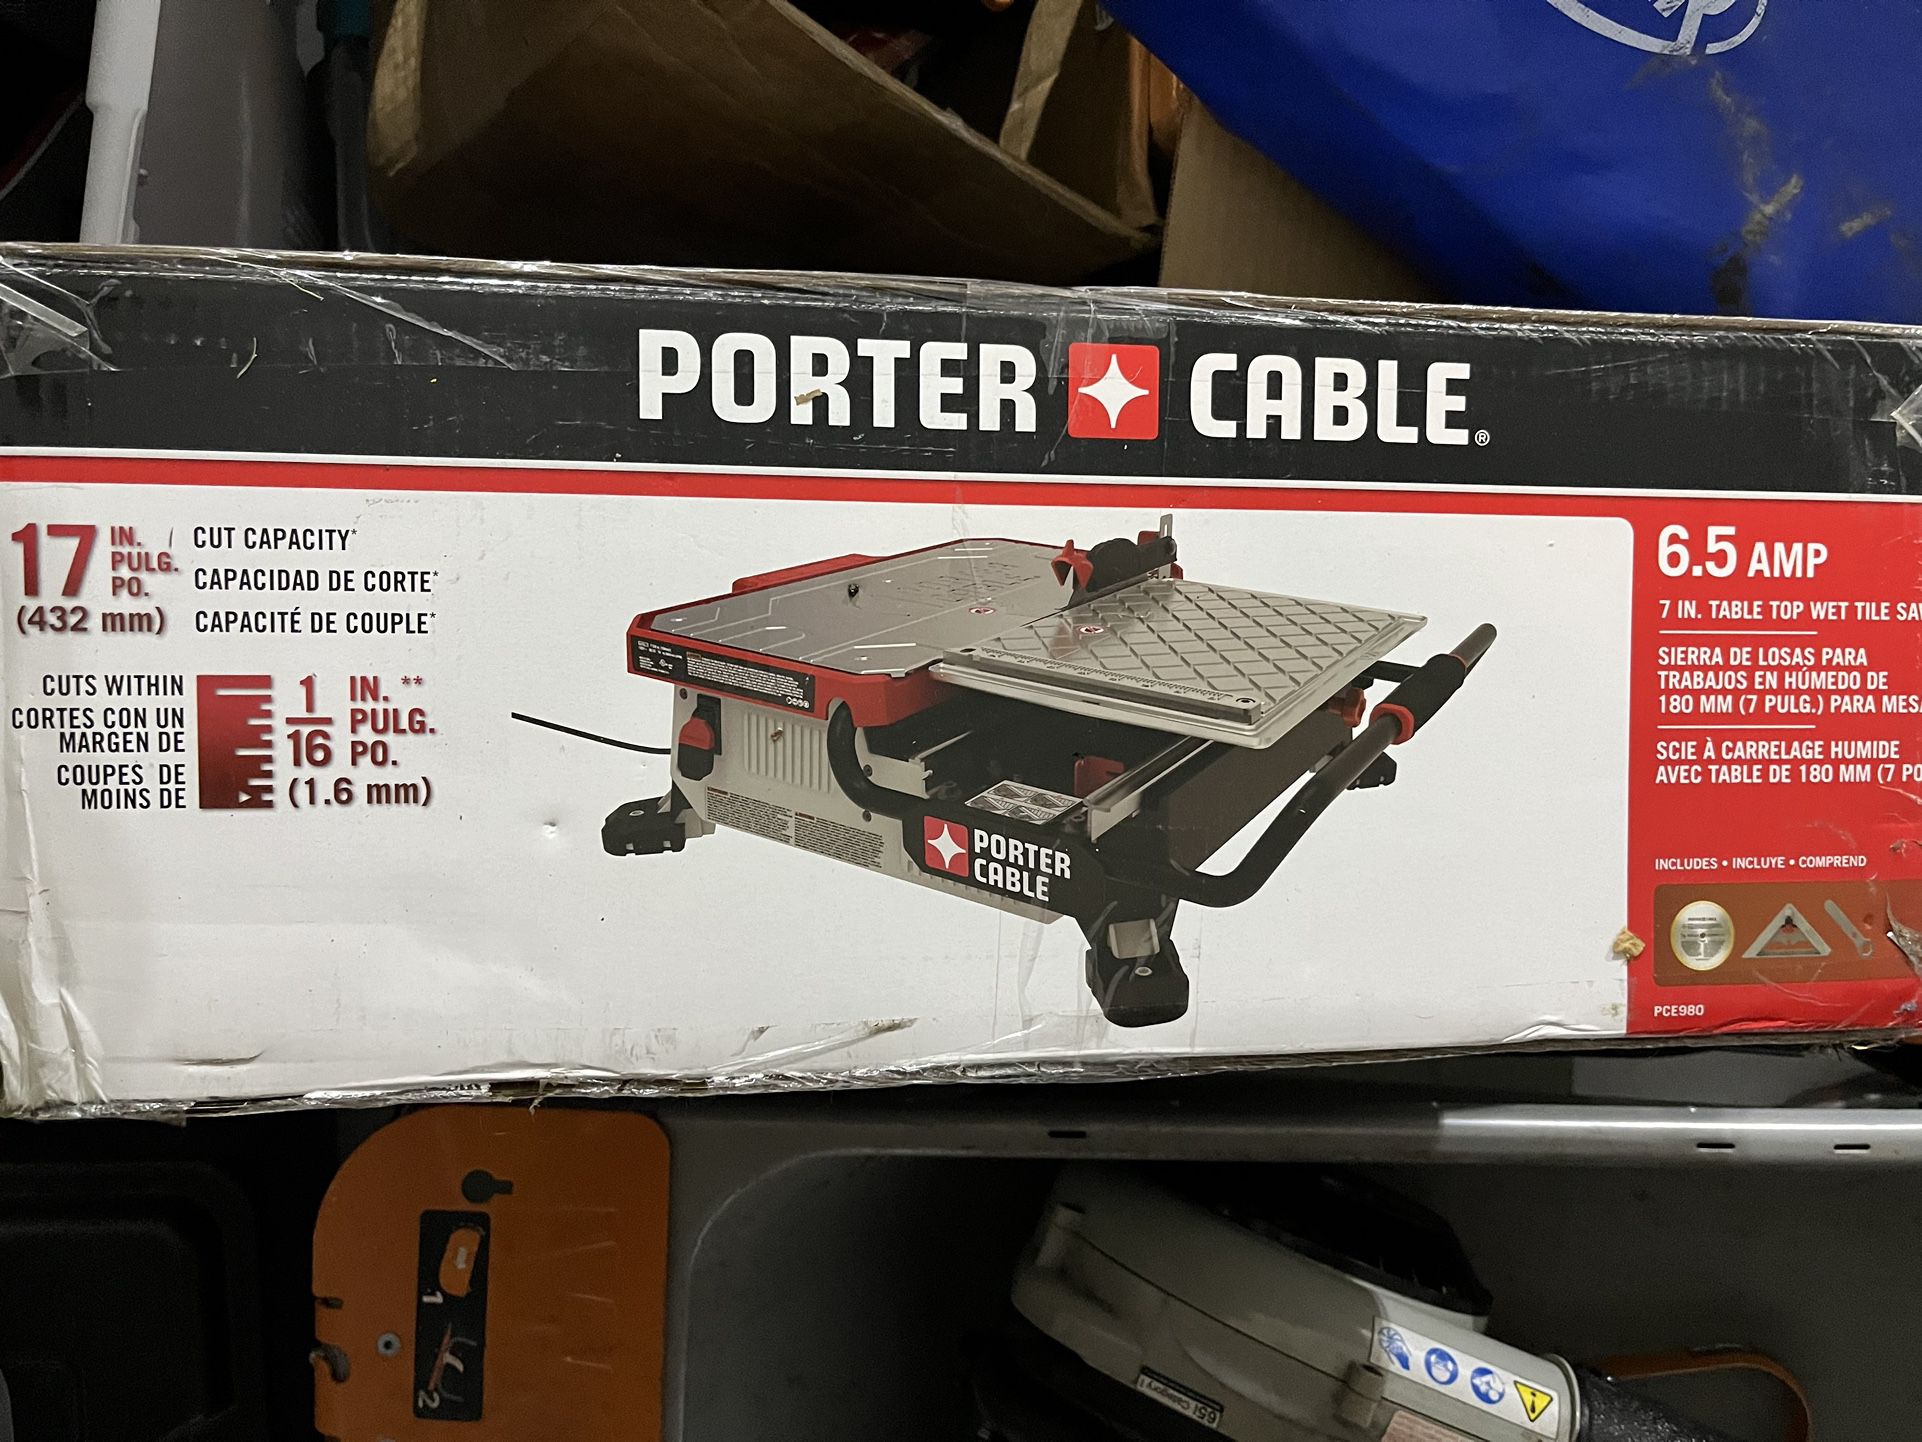 Porter Cable 7” Table Top Wet Saw